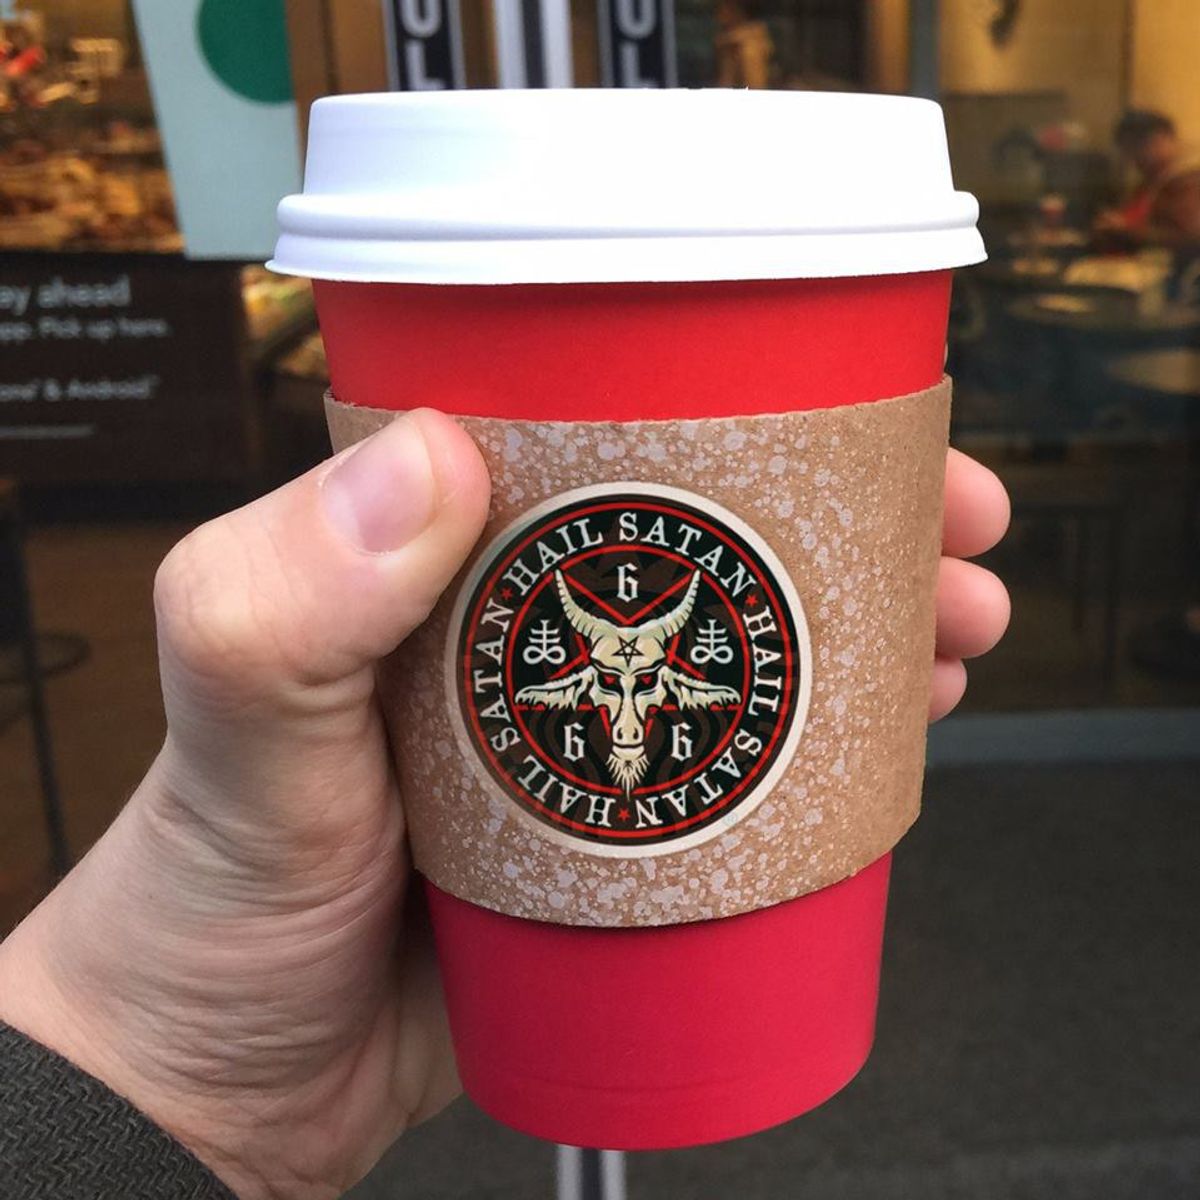 Seeing Red: Why No One Should Be Upset About The Starbucks Holiday Cups